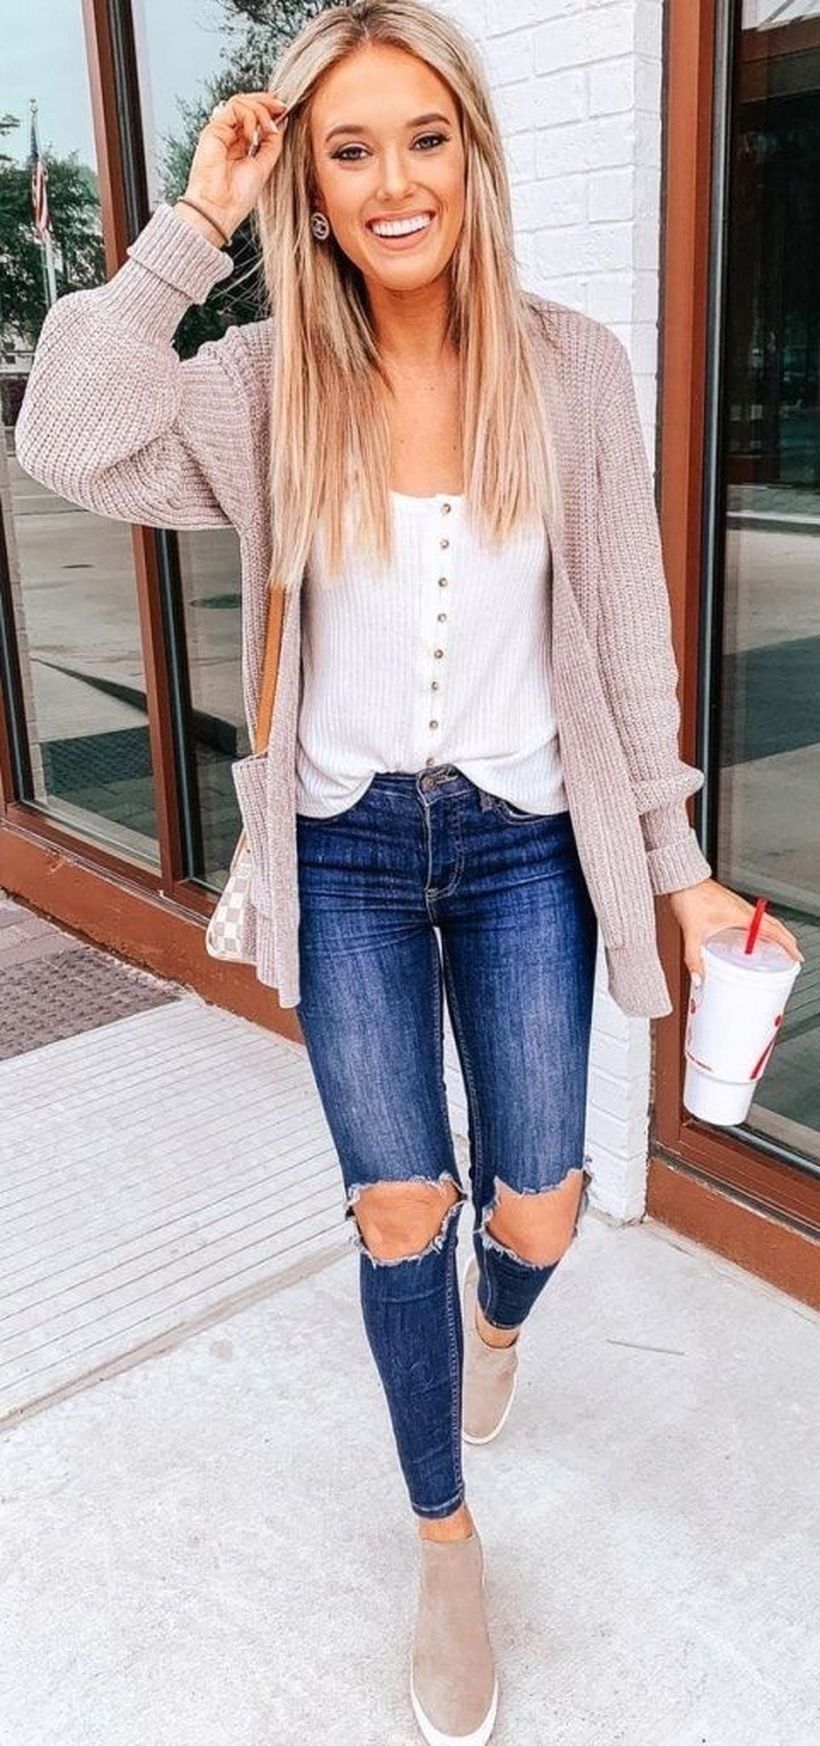 52 Cute Spring Outfits for Women 2019 - 52 Cute Spring Outfits for Women 2019 -   16 style Women spring ideas